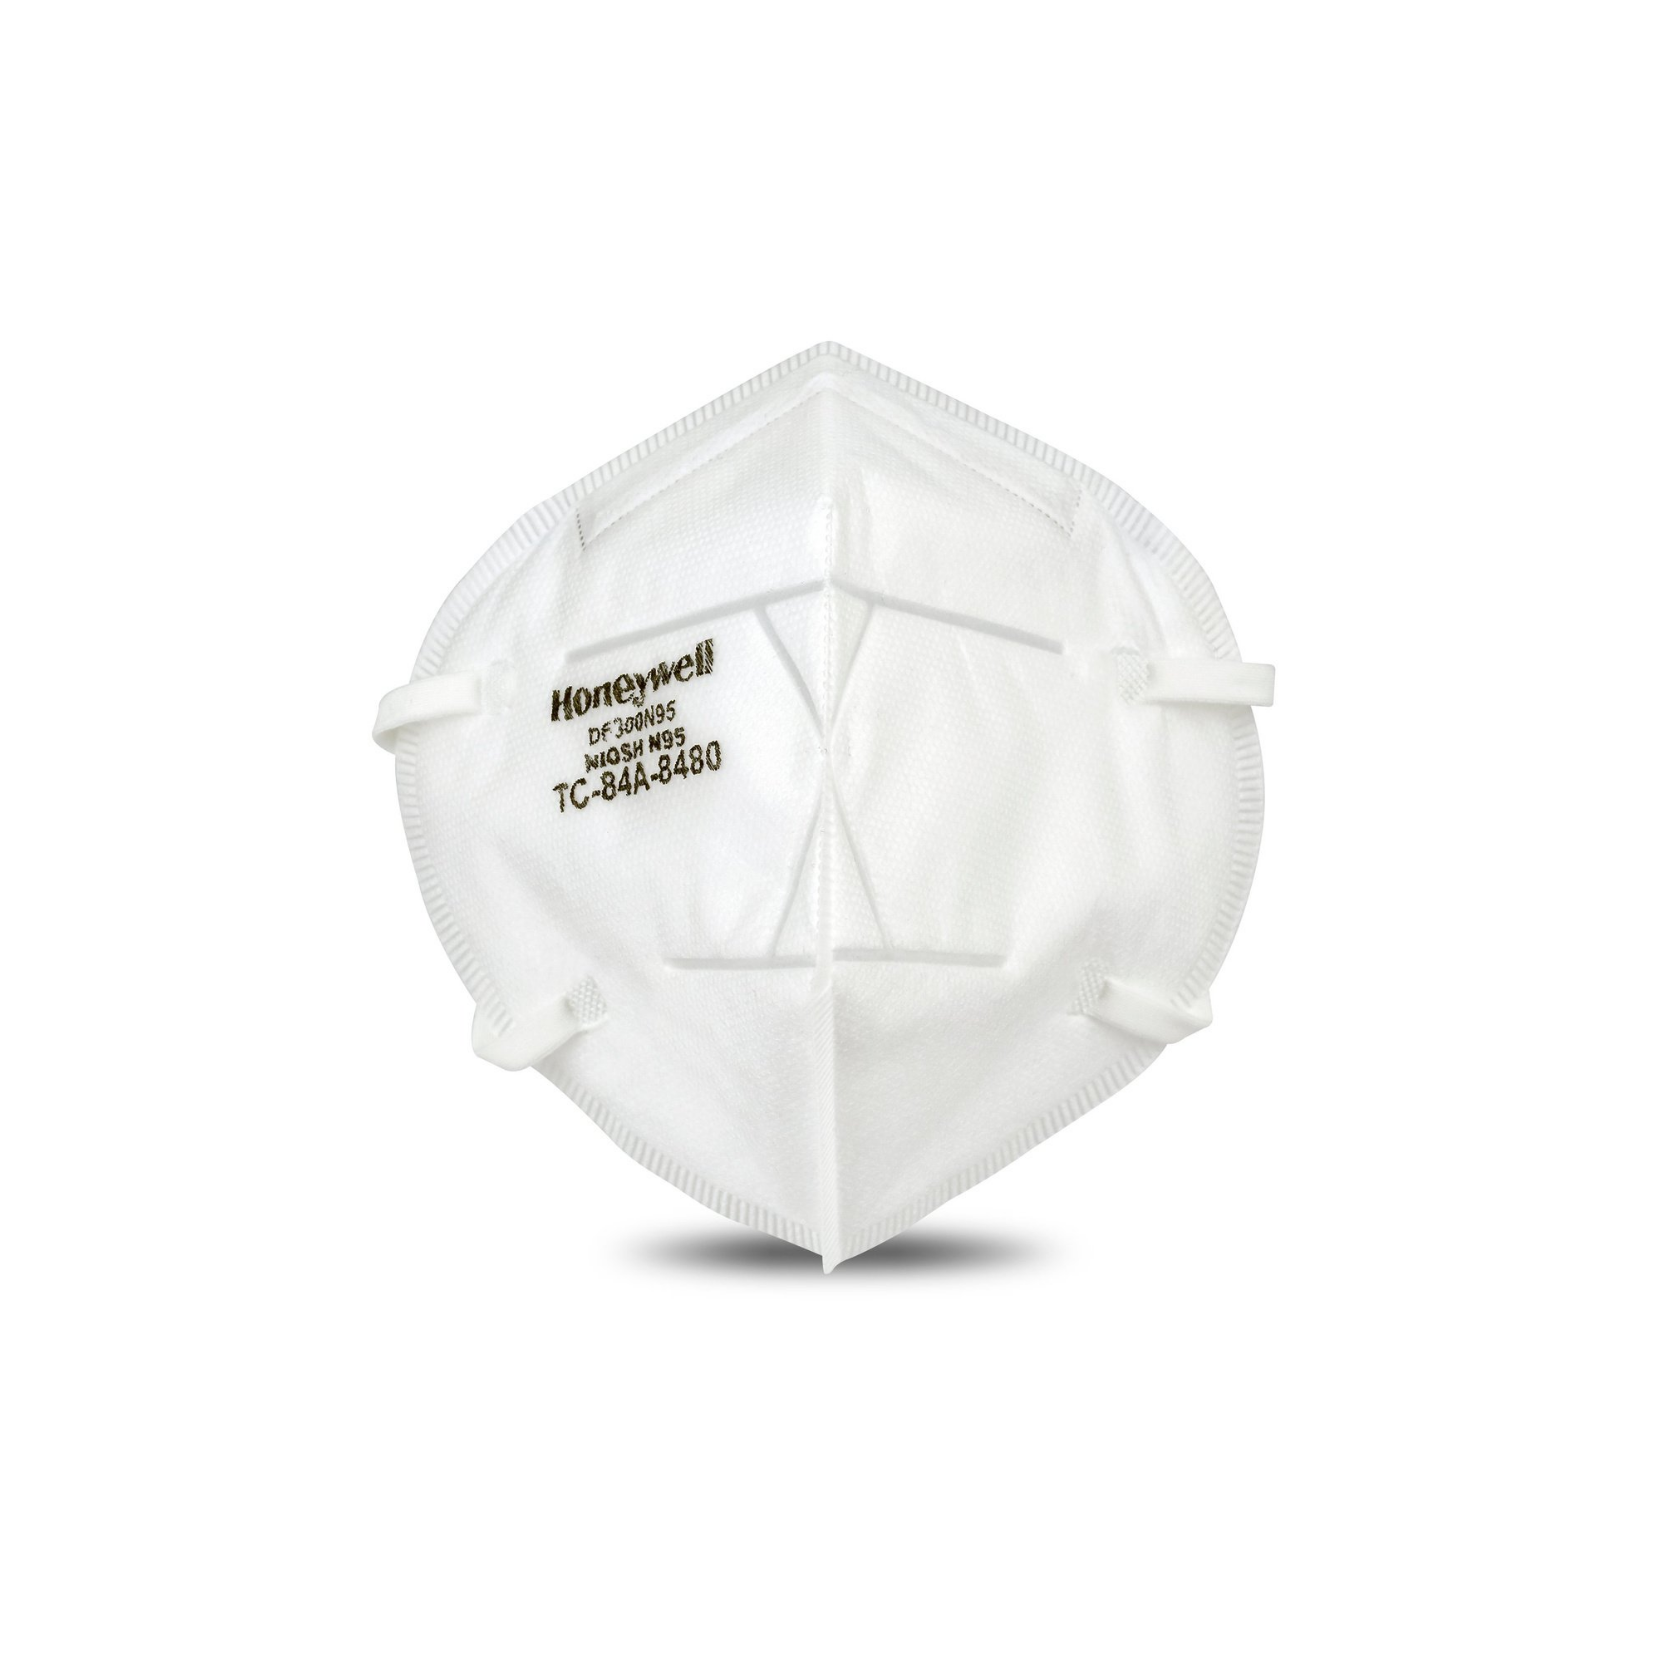 Honeywell DF300H910 N95 Particulate Disposable Respirators